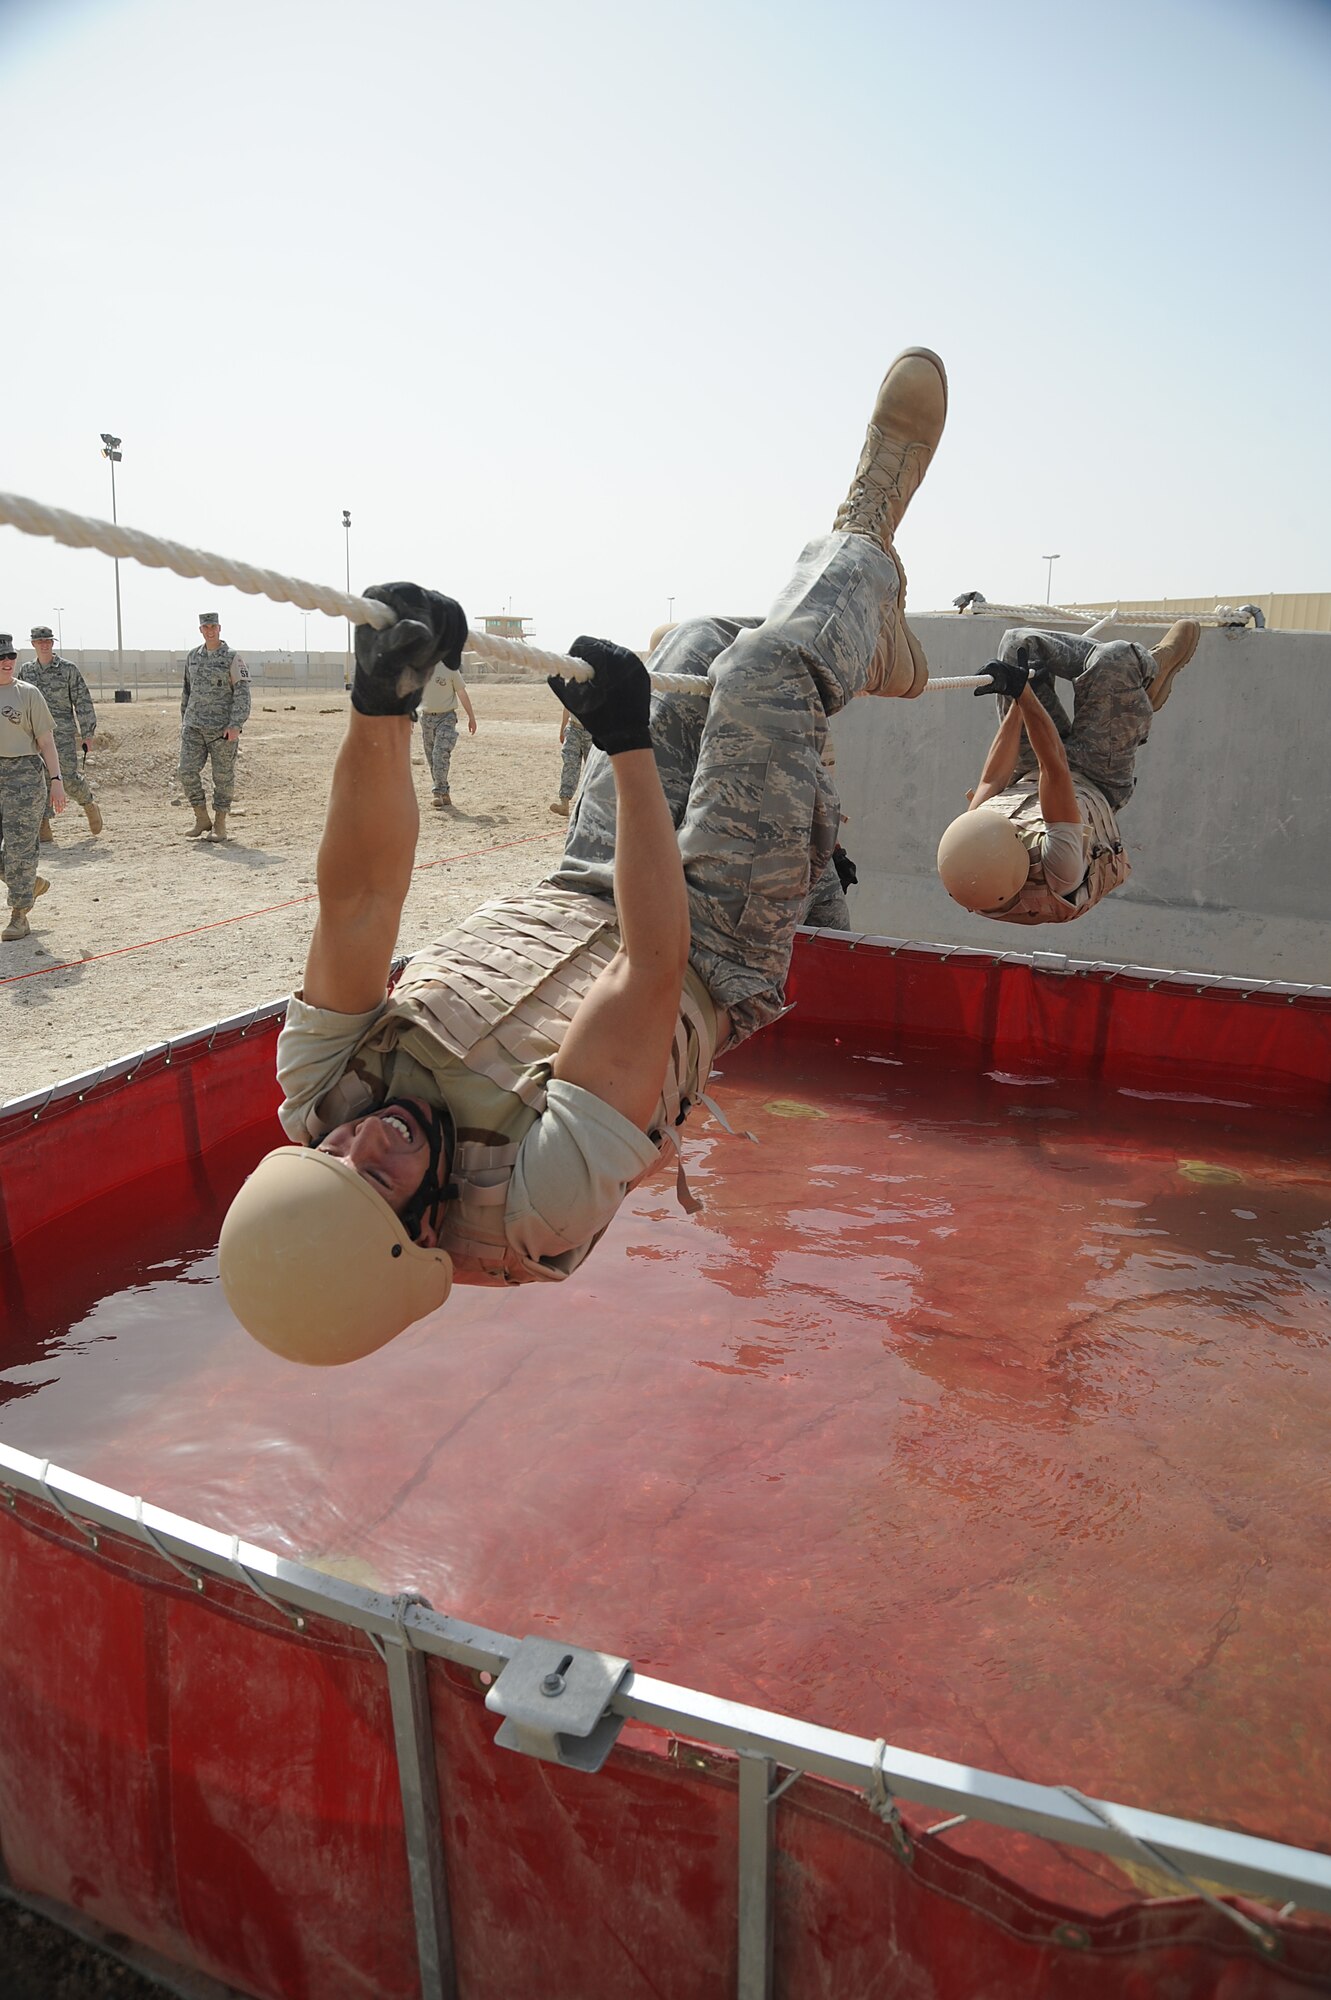 Senior Airman Matthew McCarthy, 380th Expeditionary Civil Engineer Squadron, uses a 15ft rope to cross a water obstacle with his teammates following, during a Defender Challenge course, April 25 at an undisclosed location in Southwest Asia. His team won the competition beating out second place by one second. Airman McCarthy is deployed from Bolling AFB, Wash. D.C. and hails from Omaha, Neb. (U.S. Air Force photo by Senior Airman Brian J. Ellis) (Released)